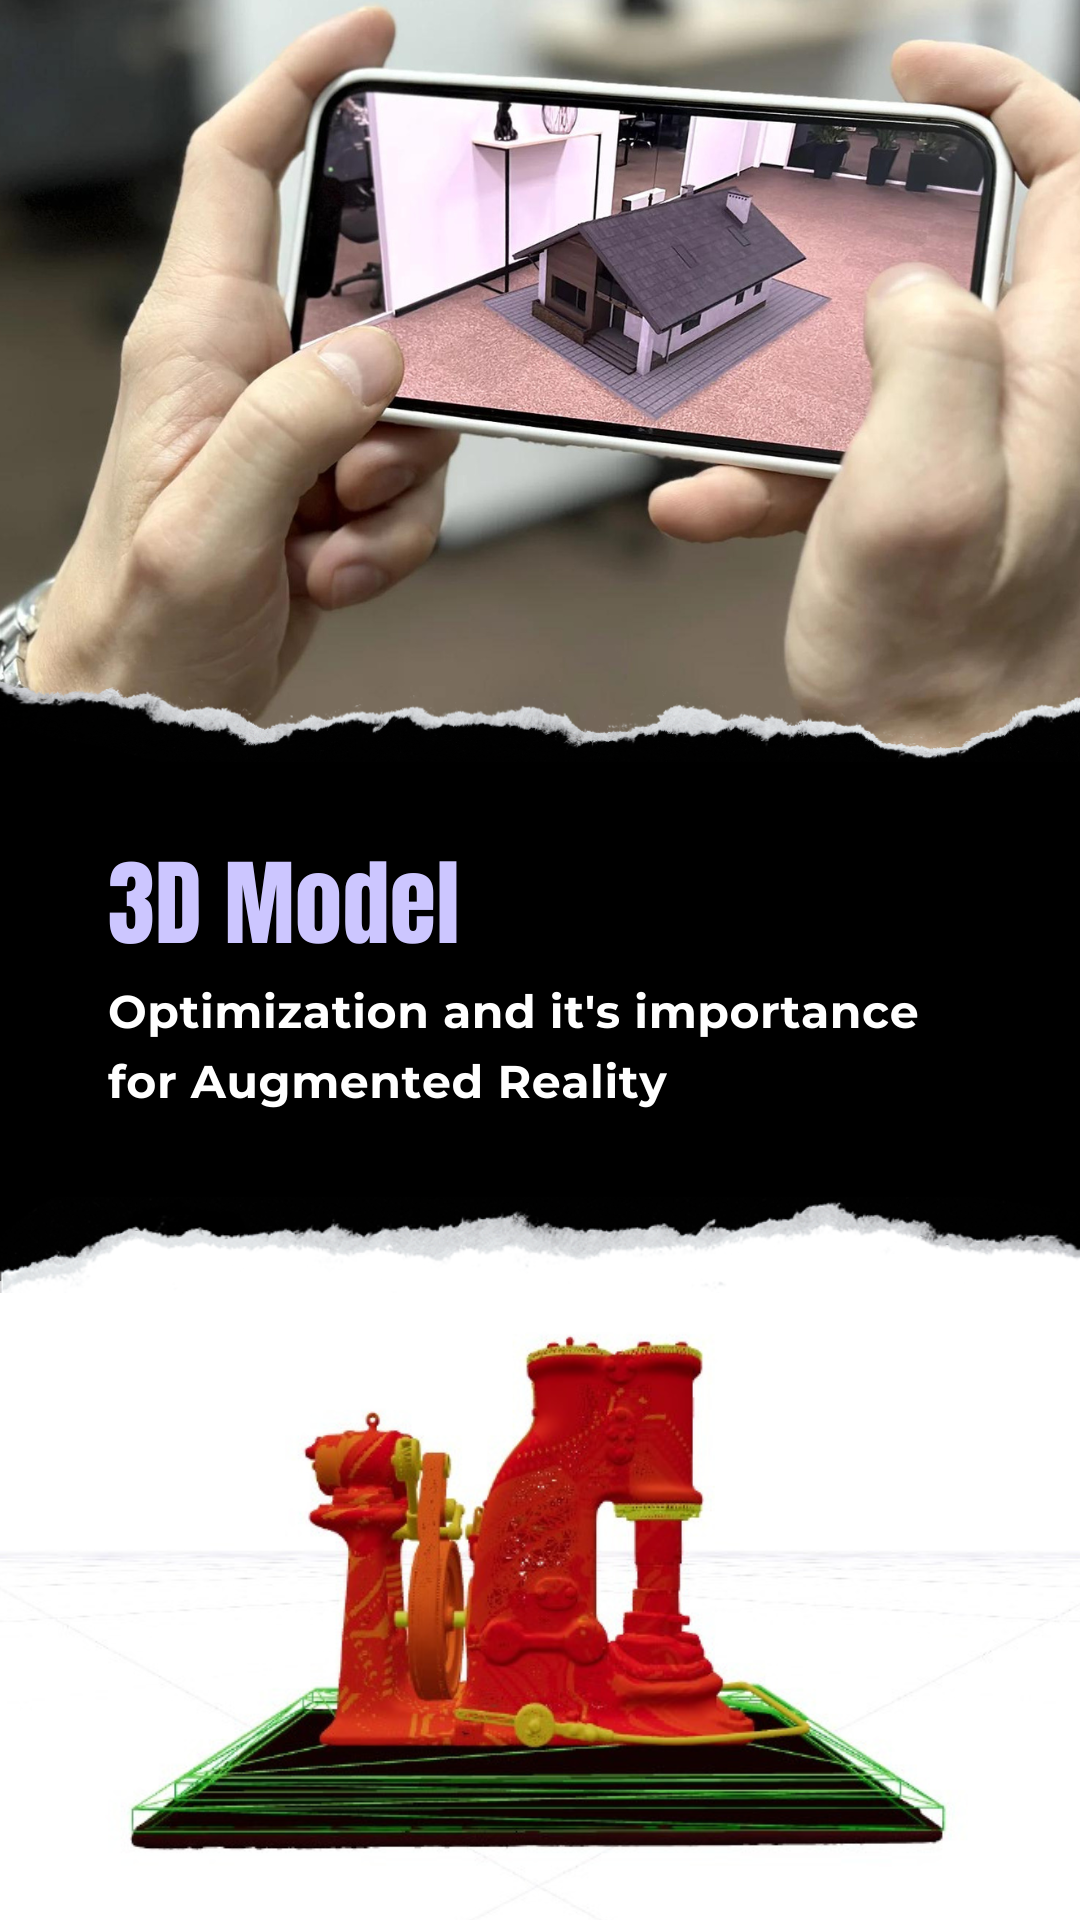 3D Model Optimization and it's importance for Augmented Reality